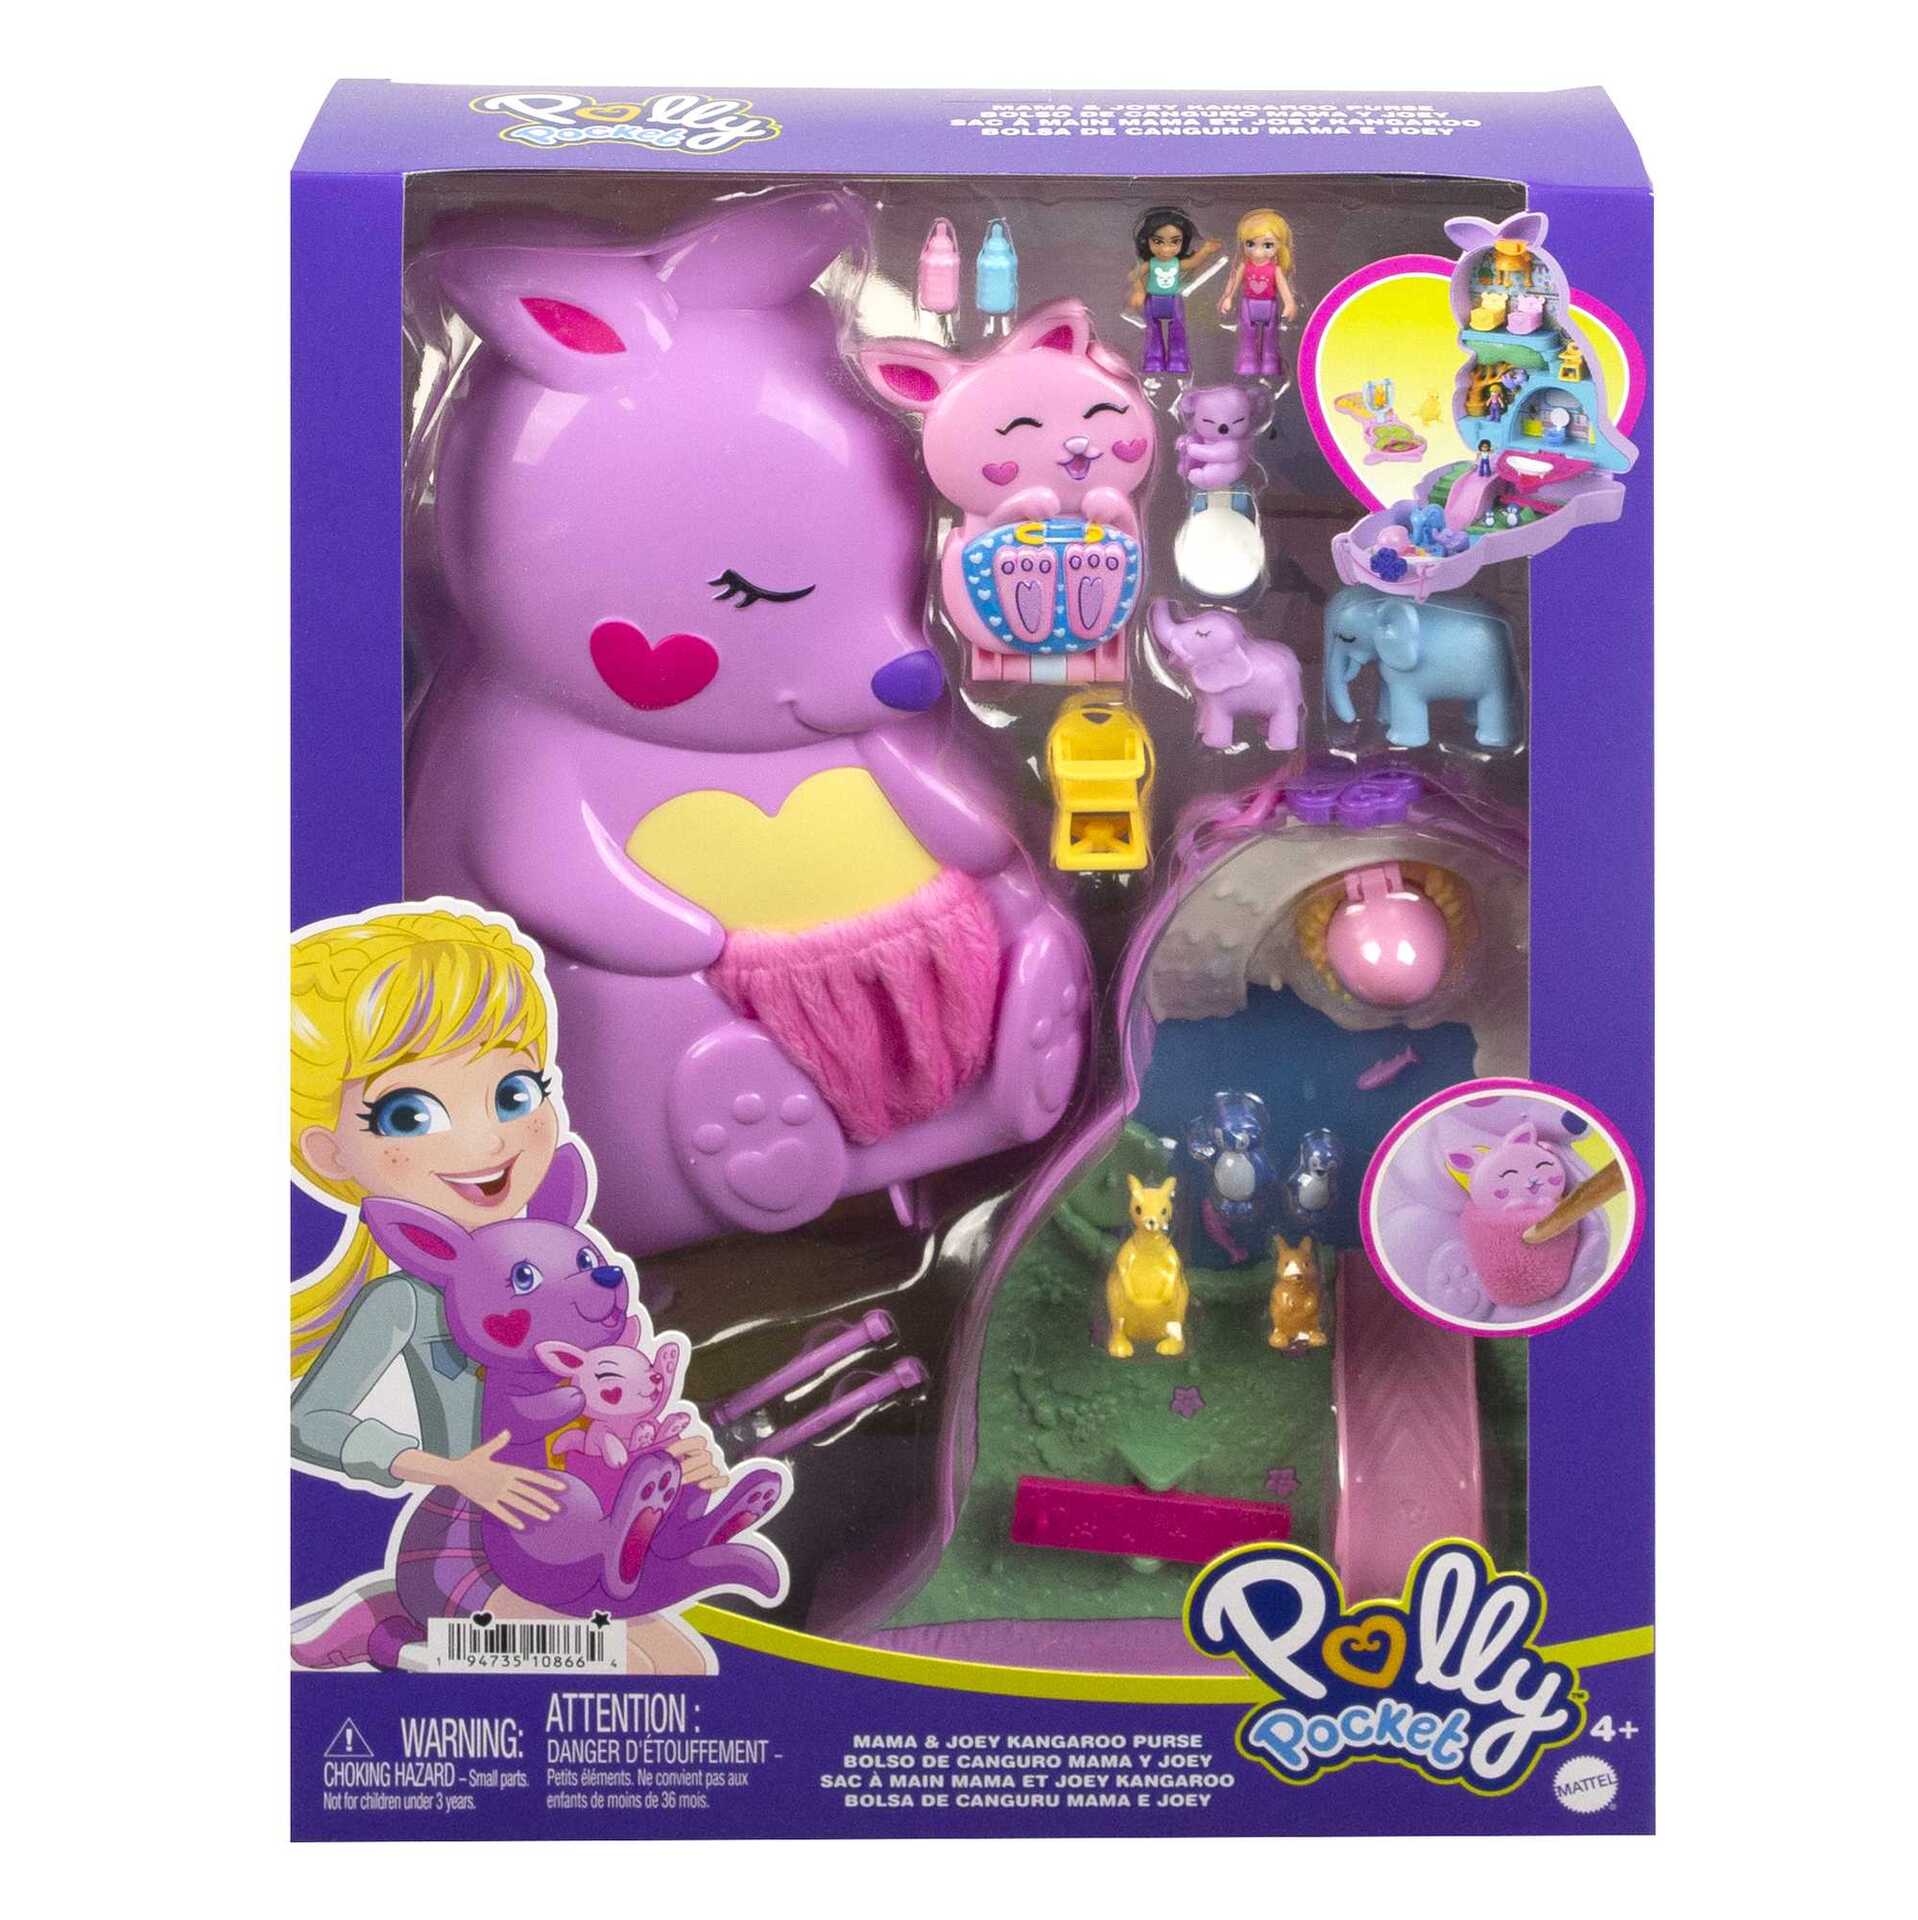 Duo animaux polly pocket chat + chien